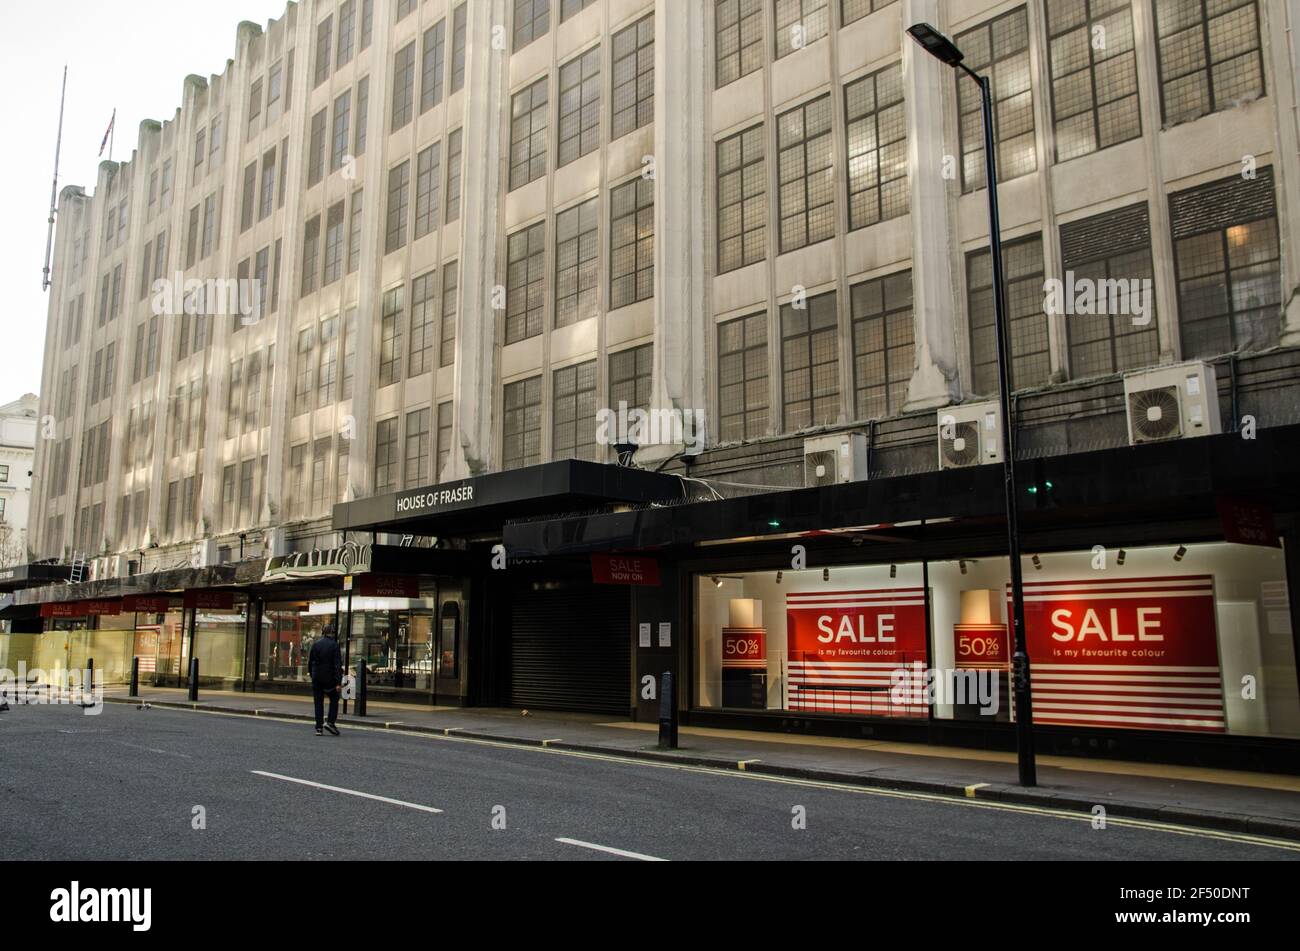 London, UK - February 26, 2021: view of the flagship branch of the House of Fraser department store chain on Oxford Street, central London.  The shop Stock Photo